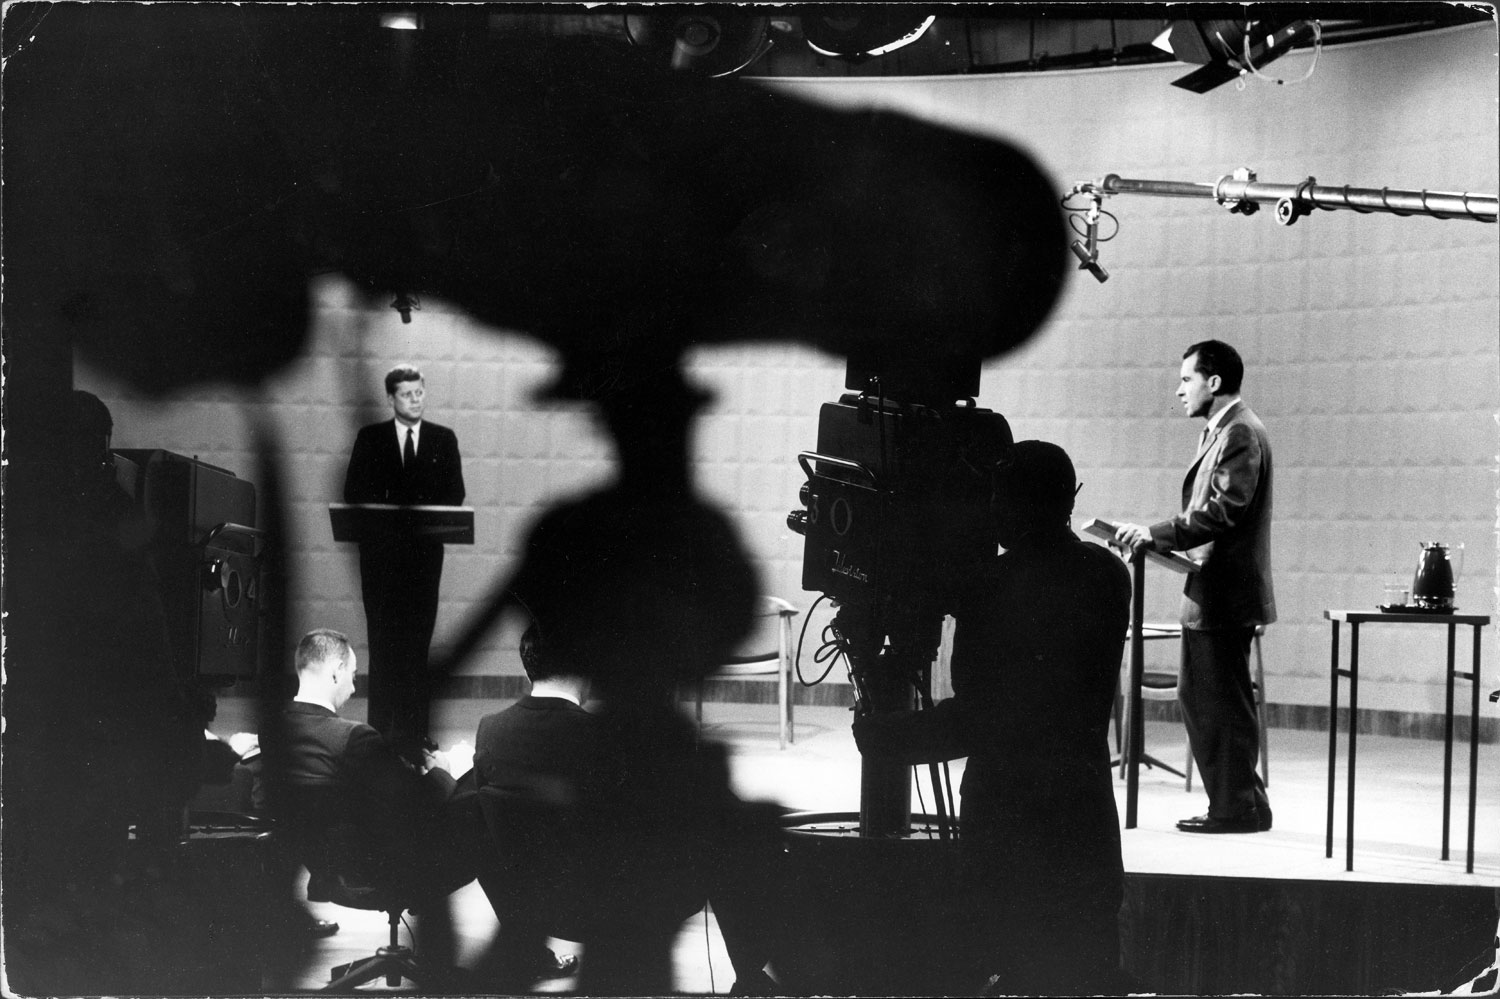 (Left to right) Presidential candidates Sen. John Kennedy and Richard Nixon stand at lecterns as moderator Howard K. Smith presides at first debate, 1960.